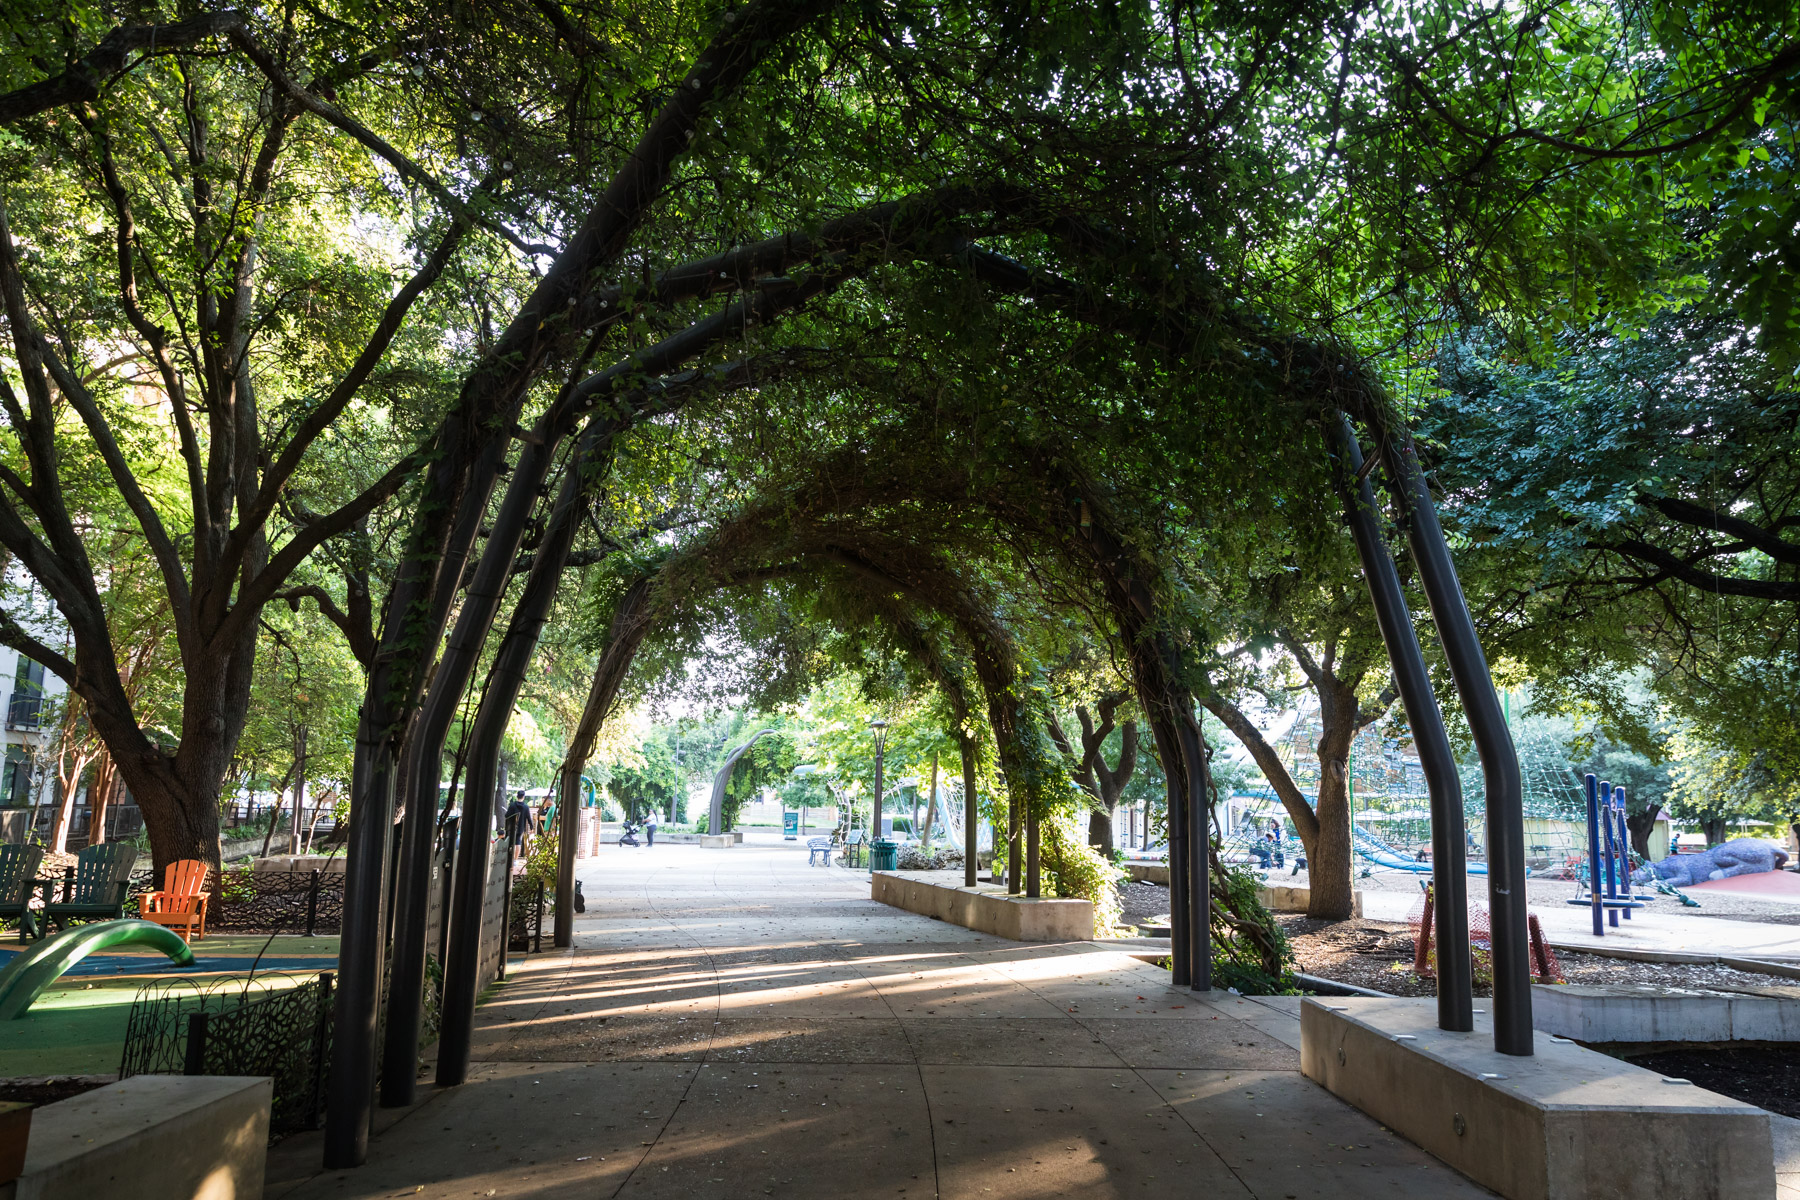 Archway through Yanaguana Garden in Hemisfair for an article on the perfect downtown San Antonio family portrait itinerary